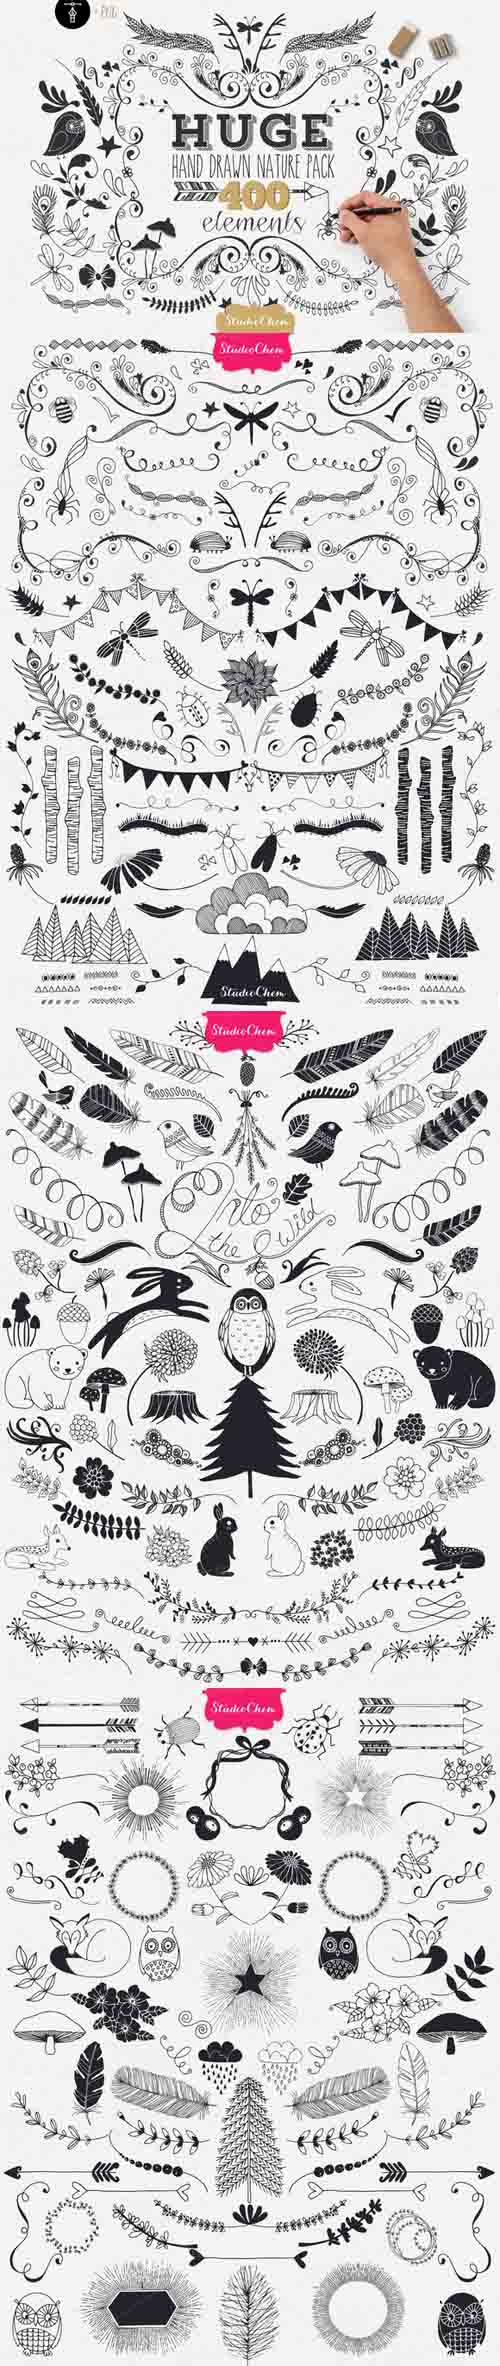 CM - HUGE Hand drawn Nature Pack Elements